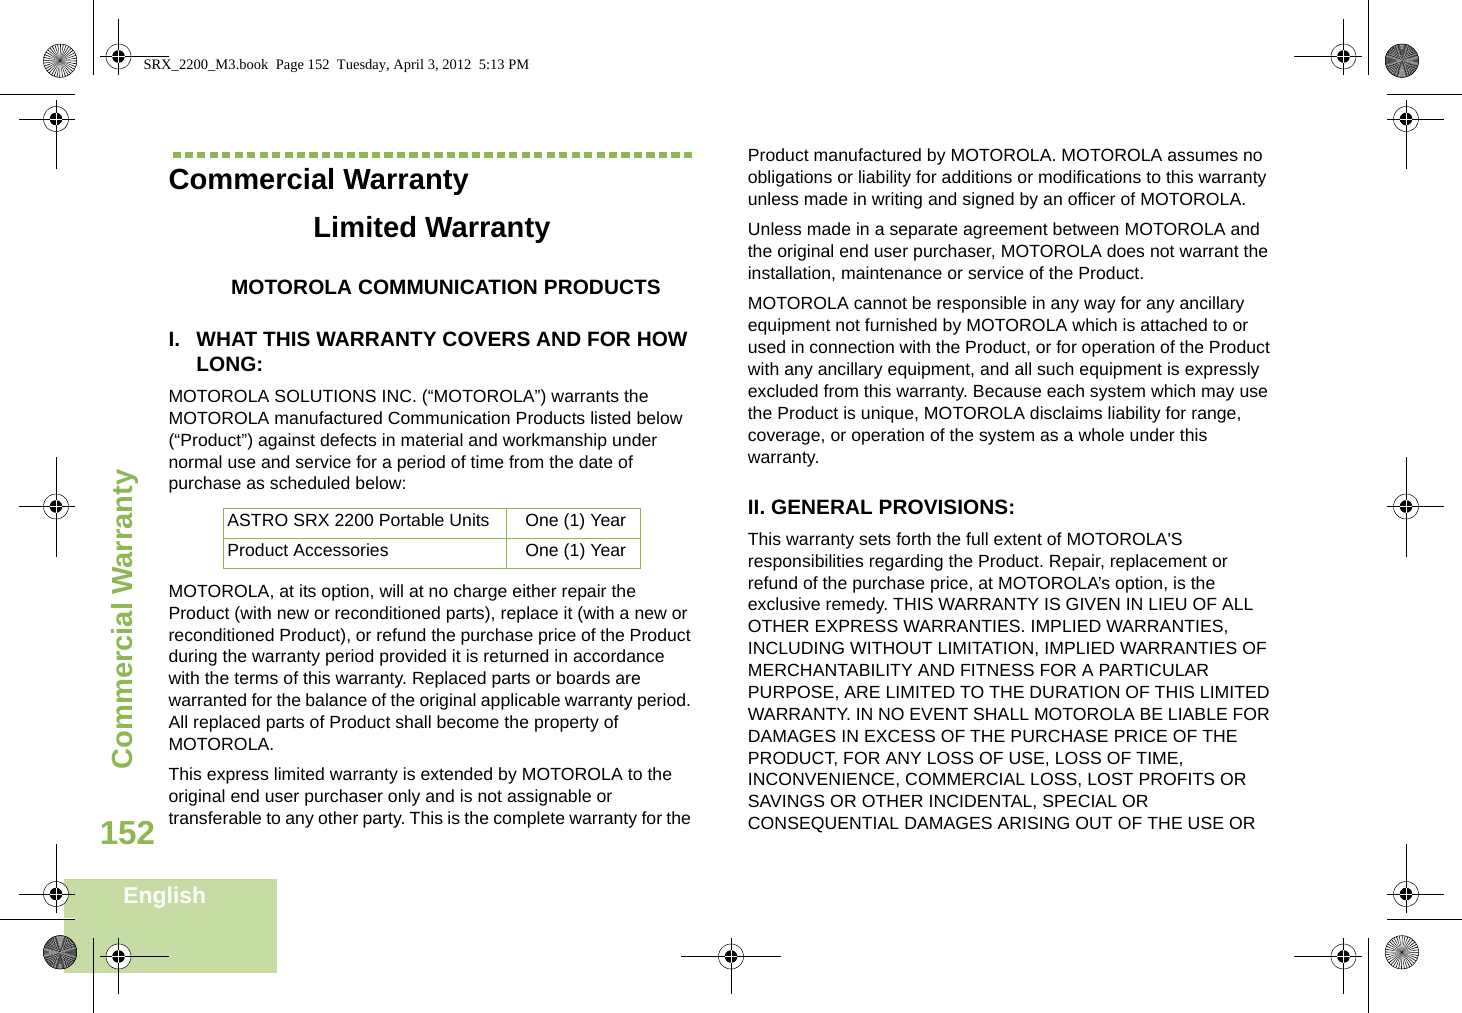 Commercial WarrantyEnglish152Commercial WarrantyLimited WarrantyMOTOROLA COMMUNICATION PRODUCTSI. WHAT THIS WARRANTY COVERS AND FOR HOW LONG:MOTOROLA SOLUTIONS INC. (“MOTOROLA”) warrants the MOTOROLA manufactured Communication Products listed below (“Product”) against defects in material and workmanship under normal use and service for a period of time from the date of purchase as scheduled below:MOTOROLA, at its option, will at no charge either repair the Product (with new or reconditioned parts), replace it (with a new or reconditioned Product), or refund the purchase price of the Product during the warranty period provided it is returned in accordance with the terms of this warranty. Replaced parts or boards are warranted for the balance of the original applicable warranty period. All replaced parts of Product shall become the property of MOTOROLA.This express limited warranty is extended by MOTOROLA to the original end user purchaser only and is not assignable or transferable to any other party. This is the complete warranty for the Product manufactured by MOTOROLA. MOTOROLA assumes no obligations or liability for additions or modifications to this warranty unless made in writing and signed by an officer of MOTOROLA. Unless made in a separate agreement between MOTOROLA and the original end user purchaser, MOTOROLA does not warrant the installation, maintenance or service of the Product.MOTOROLA cannot be responsible in any way for any ancillary equipment not furnished by MOTOROLA which is attached to or used in connection with the Product, or for operation of the Product with any ancillary equipment, and all such equipment is expressly excluded from this warranty. Because each system which may use the Product is unique, MOTOROLA disclaims liability for range, coverage, or operation of the system as a whole under this warranty.II. GENERAL PROVISIONS:This warranty sets forth the full extent of MOTOROLA&apos;S responsibilities regarding the Product. Repair, replacement or refund of the purchase price, at MOTOROLA’s option, is the exclusive remedy. THIS WARRANTY IS GIVEN IN LIEU OF ALL OTHER EXPRESS WARRANTIES. IMPLIED WARRANTIES, INCLUDING WITHOUT LIMITATION, IMPLIED WARRANTIES OF MERCHANTABILITY AND FITNESS FOR A PARTICULAR PURPOSE, ARE LIMITED TO THE DURATION OF THIS LIMITED WARRANTY. IN NO EVENT SHALL MOTOROLA BE LIABLE FOR DAMAGES IN EXCESS OF THE PURCHASE PRICE OF THE PRODUCT, FOR ANY LOSS OF USE, LOSS OF TIME, INCONVENIENCE, COMMERCIAL LOSS, LOST PROFITS OR SAVINGS OR OTHER INCIDENTAL, SPECIAL OR CONSEQUENTIAL DAMAGES ARISING OUT OF THE USE OR ASTRO SRX 2200 Portable Units One (1) YearProduct Accessories One (1) YearSRX_2200_M3.book  Page 152  Tuesday, April 3, 2012  5:13 PM